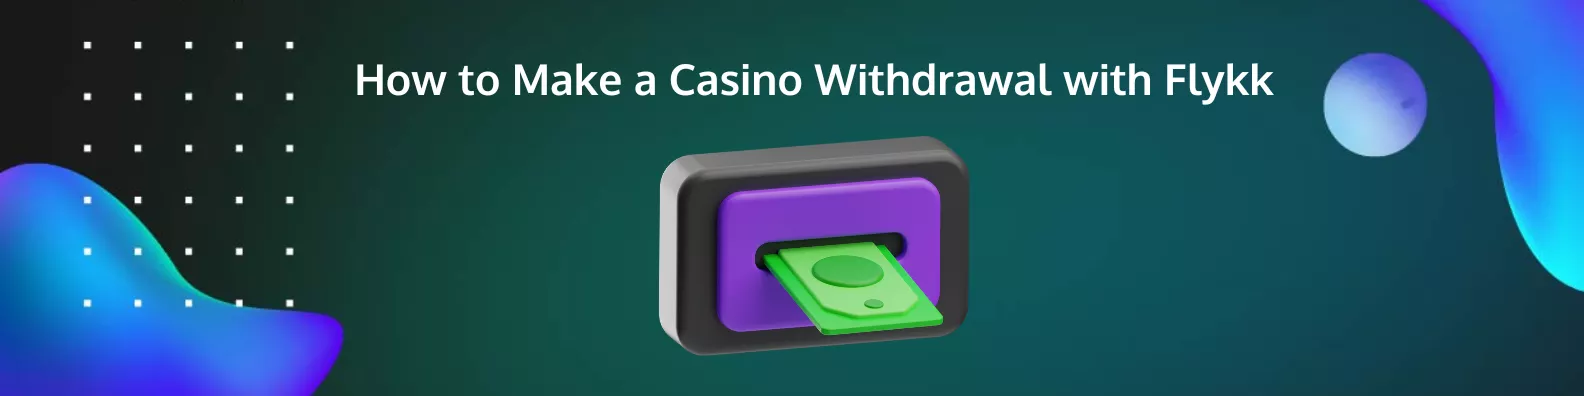 How to Make a Casino Withdrawal with Flykk